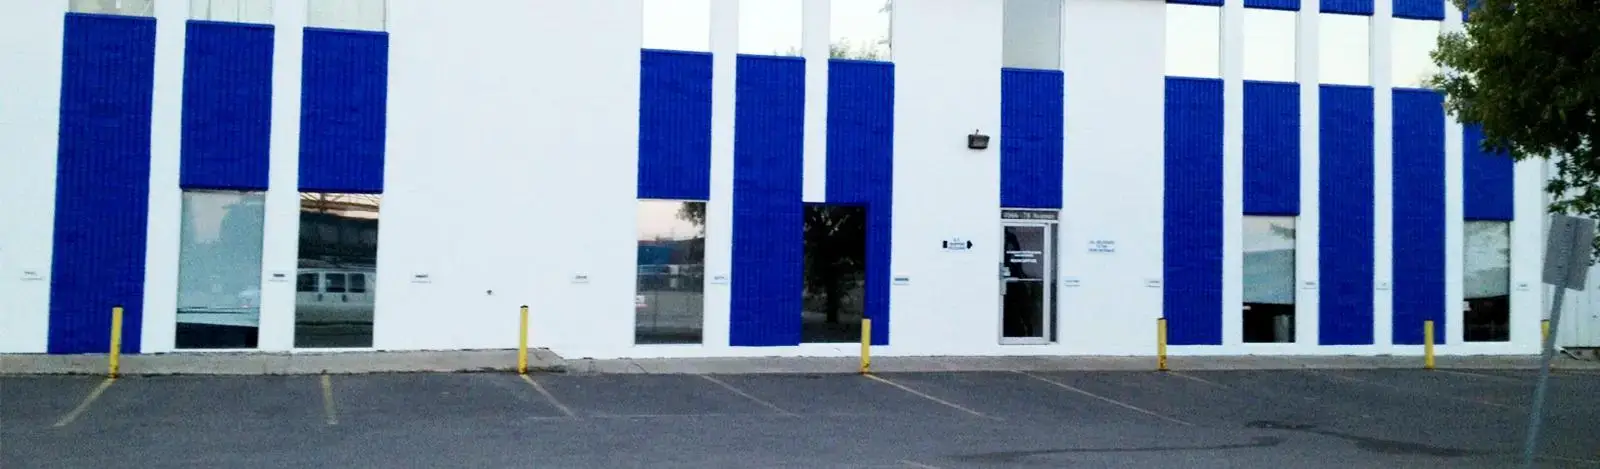 industrial building exterior painted blue and white